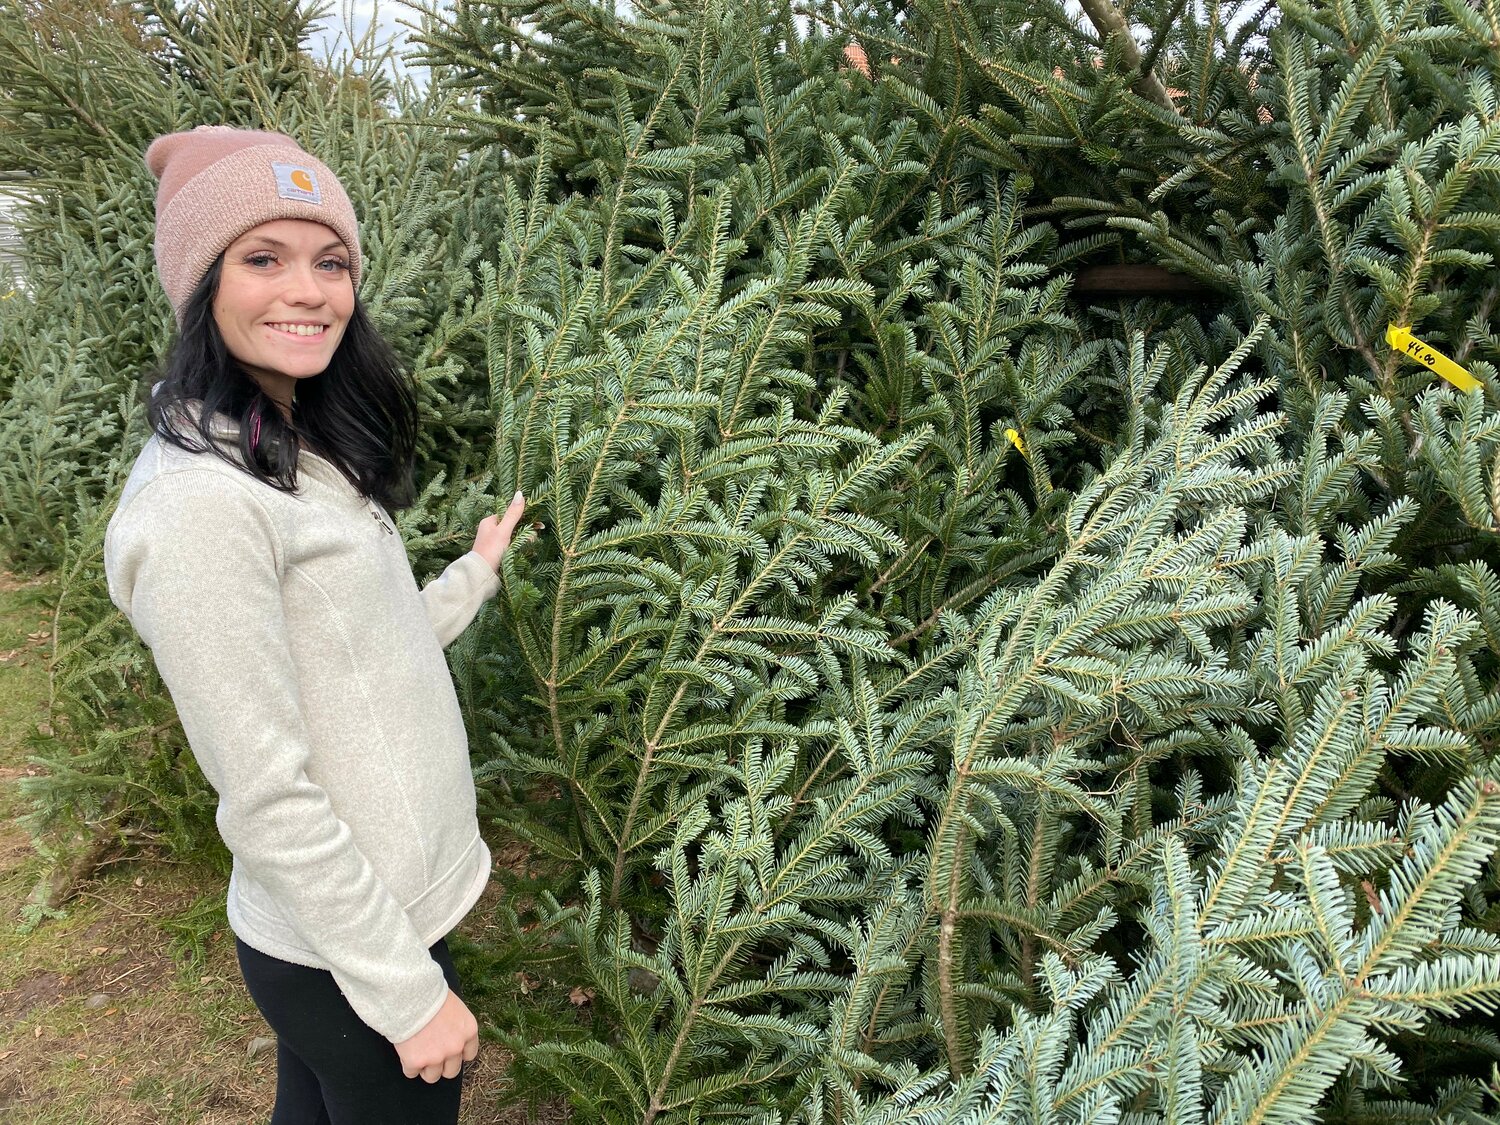 Walton resident Stephanie Morgan purchased a Christmas tree at the Walton Fire Department annual fundraiser, Sunday Nov. 26. She was looking for a tall tree to fill the space in her living room, she said.